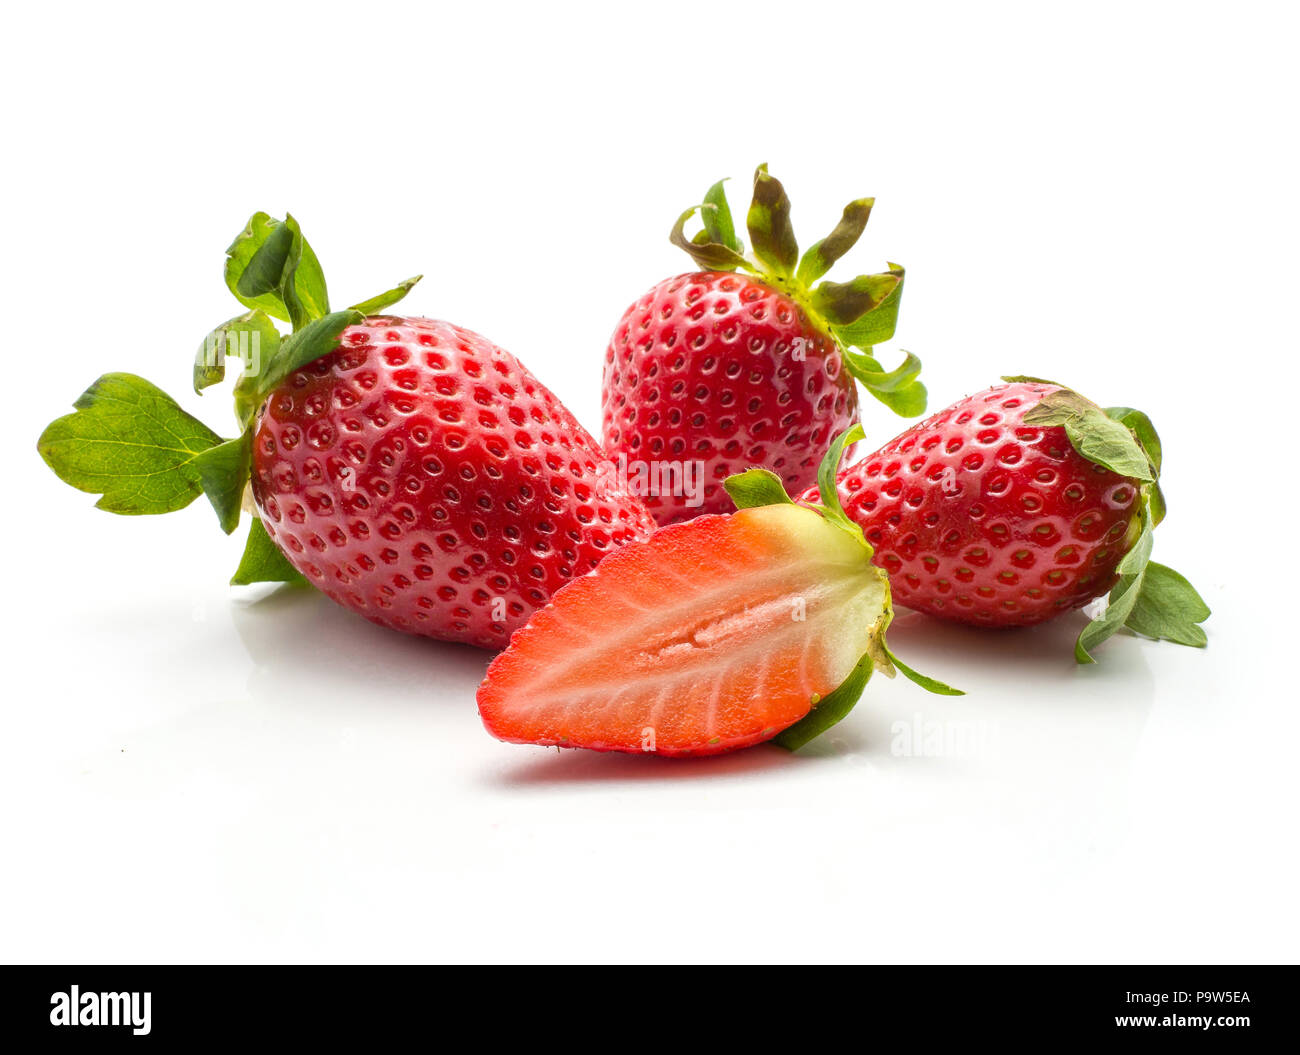 Three garden strawberries and one fresh cut half isolated on white background Stock Photo